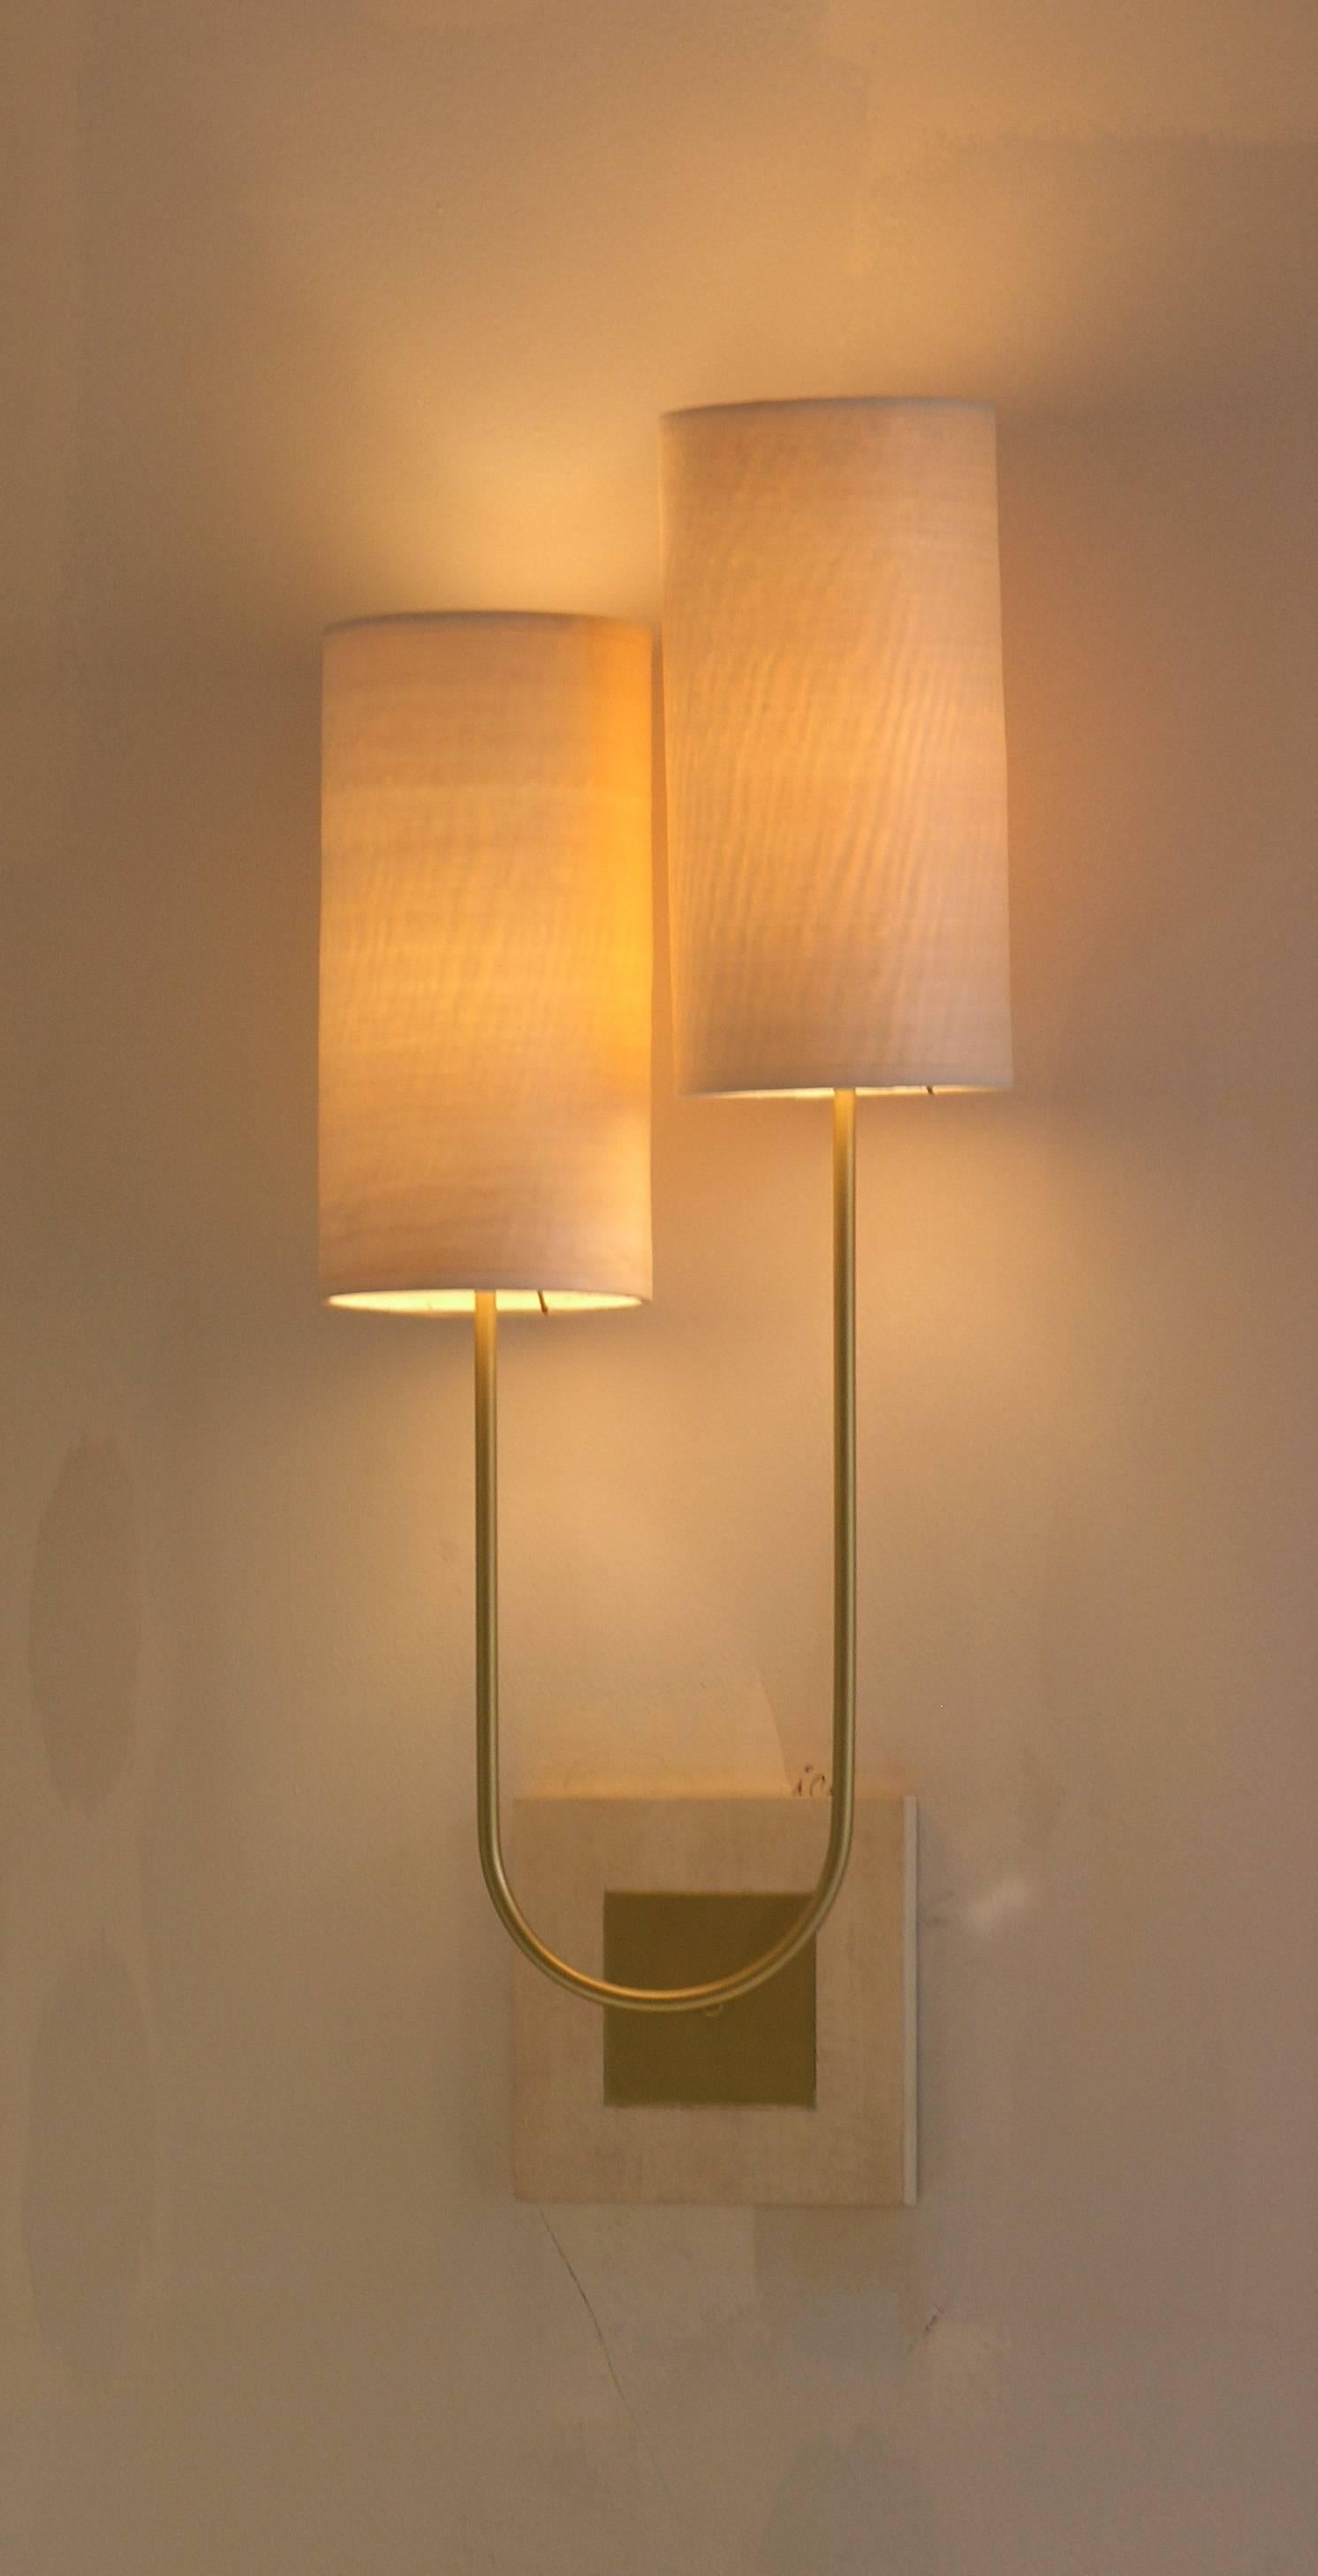 Pair of wall lamp sconce “sano” left and right gold bronze patina and tow wooden sconce by Aymeric Lefort made to order.
   